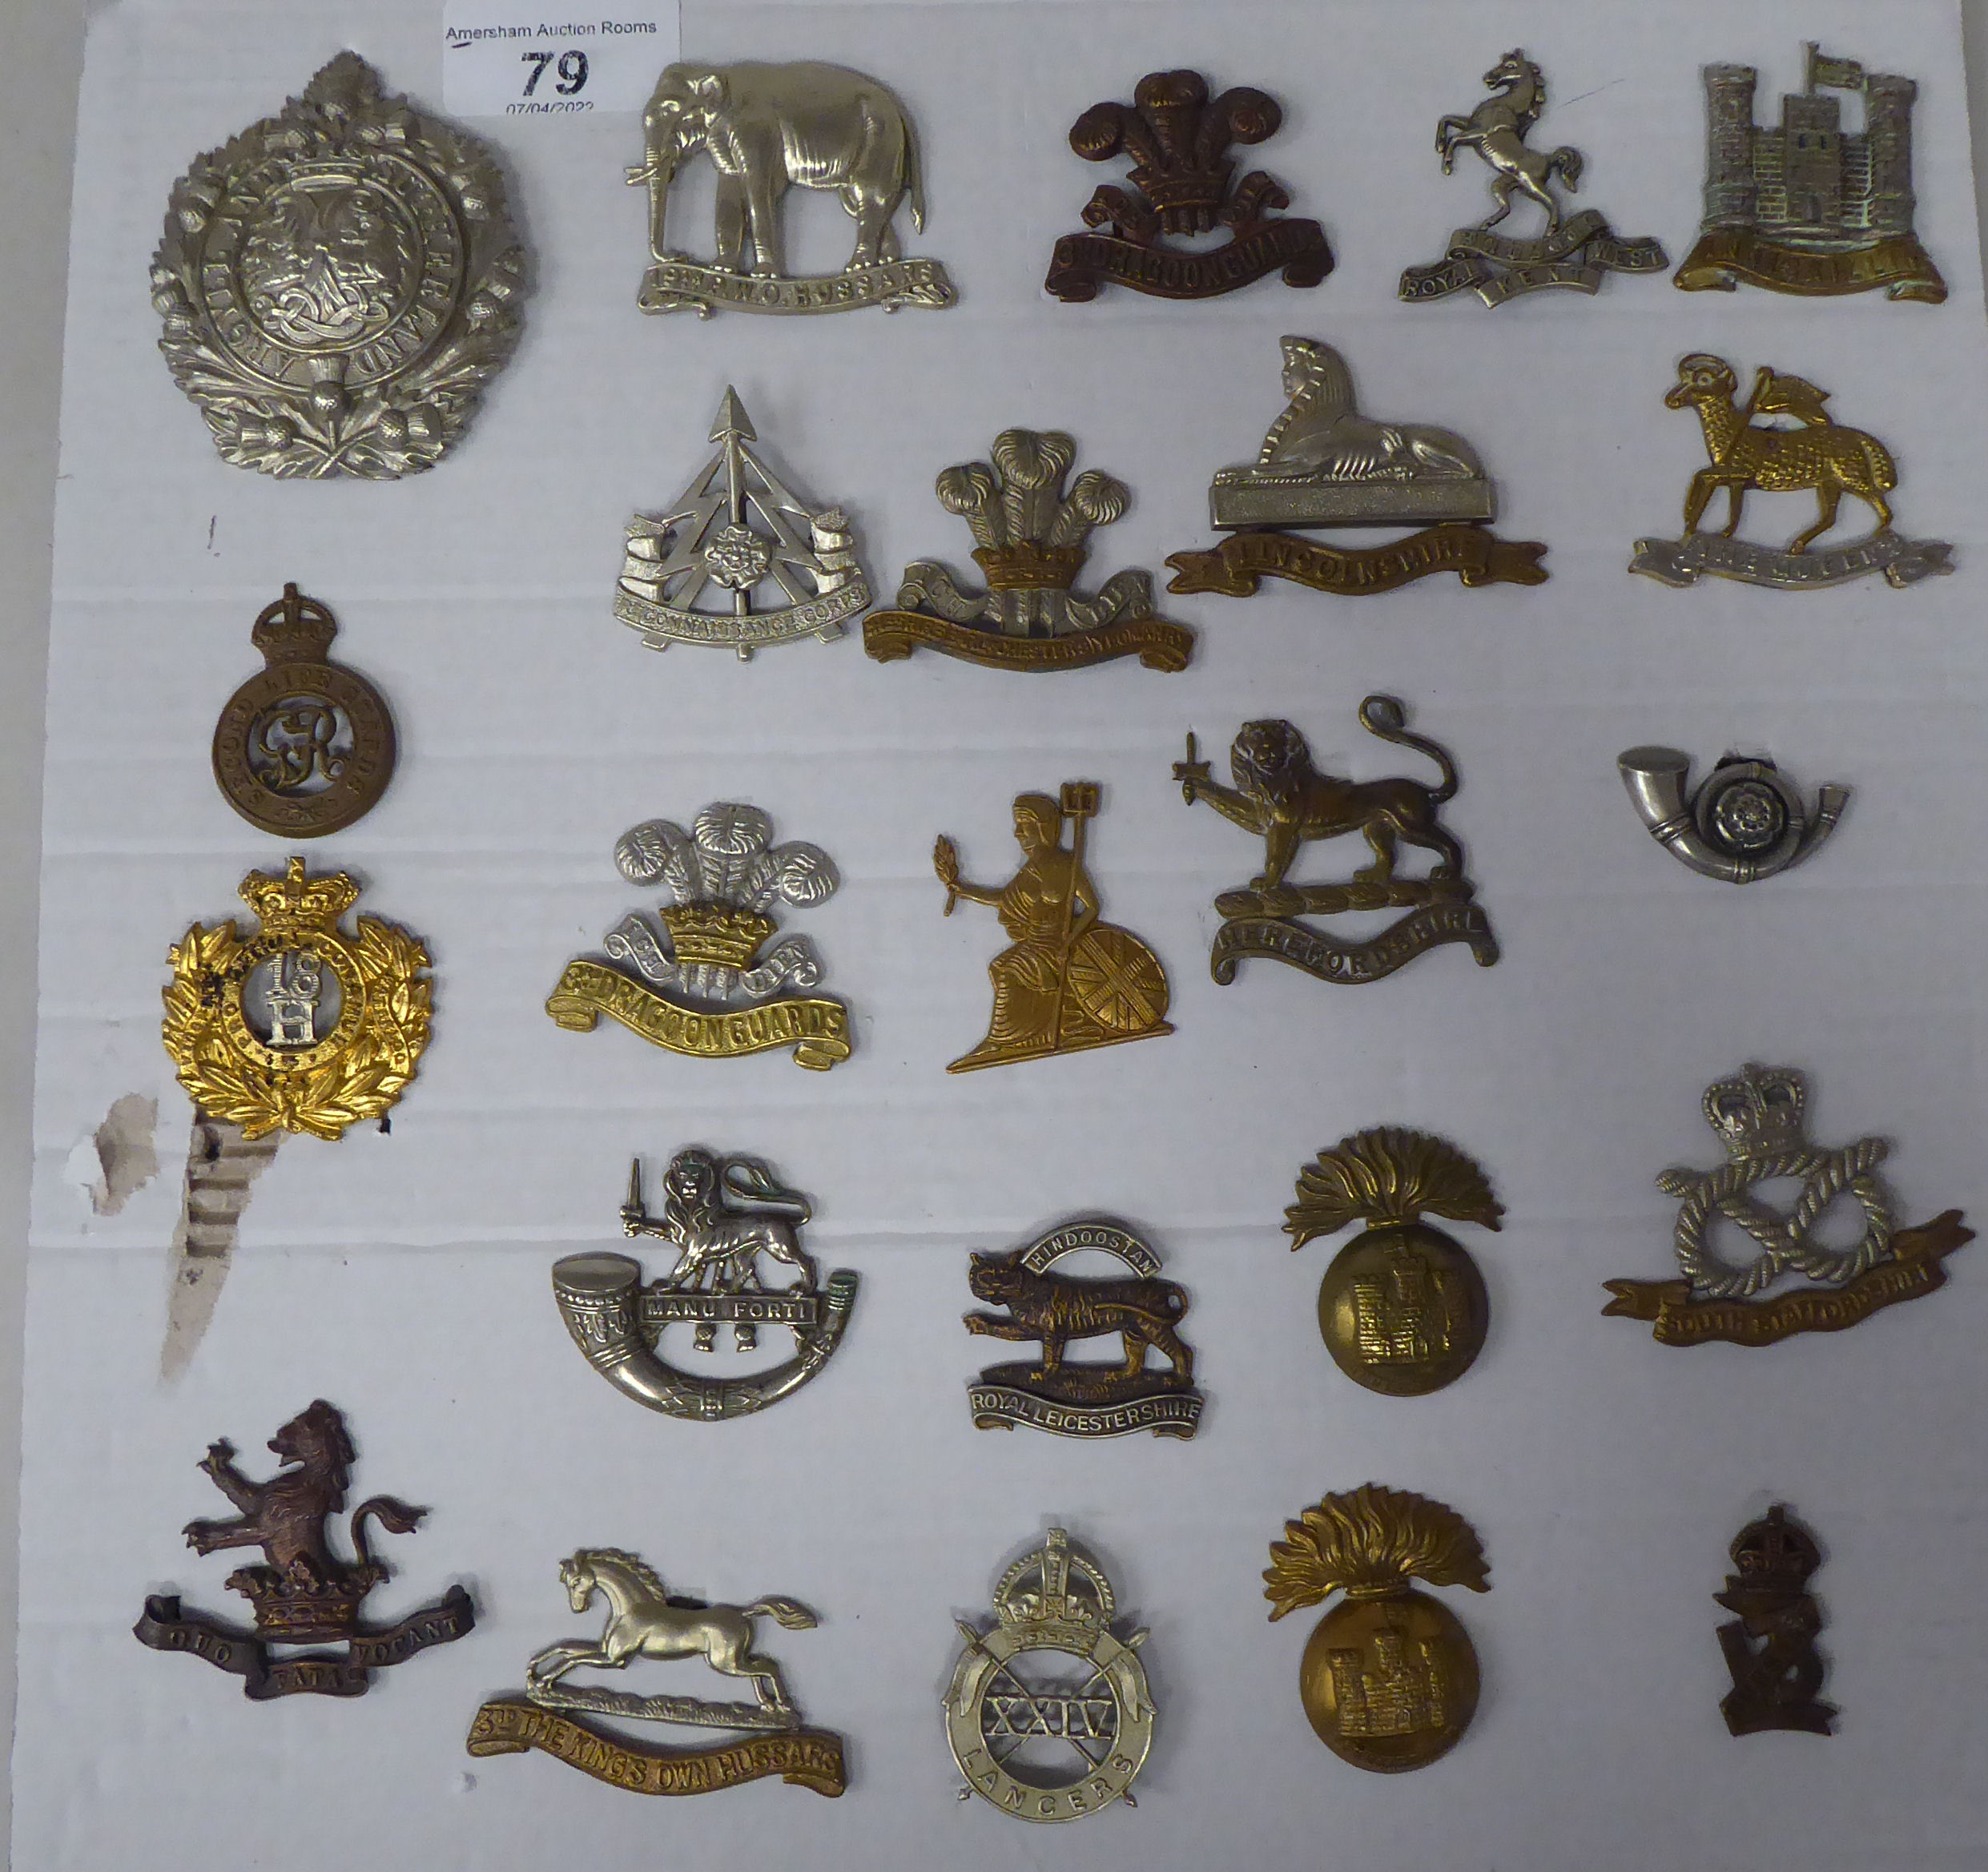 Twenty-four military cap badges, some copies: to include 3rd Dragoon Guards, 3rd King's Own